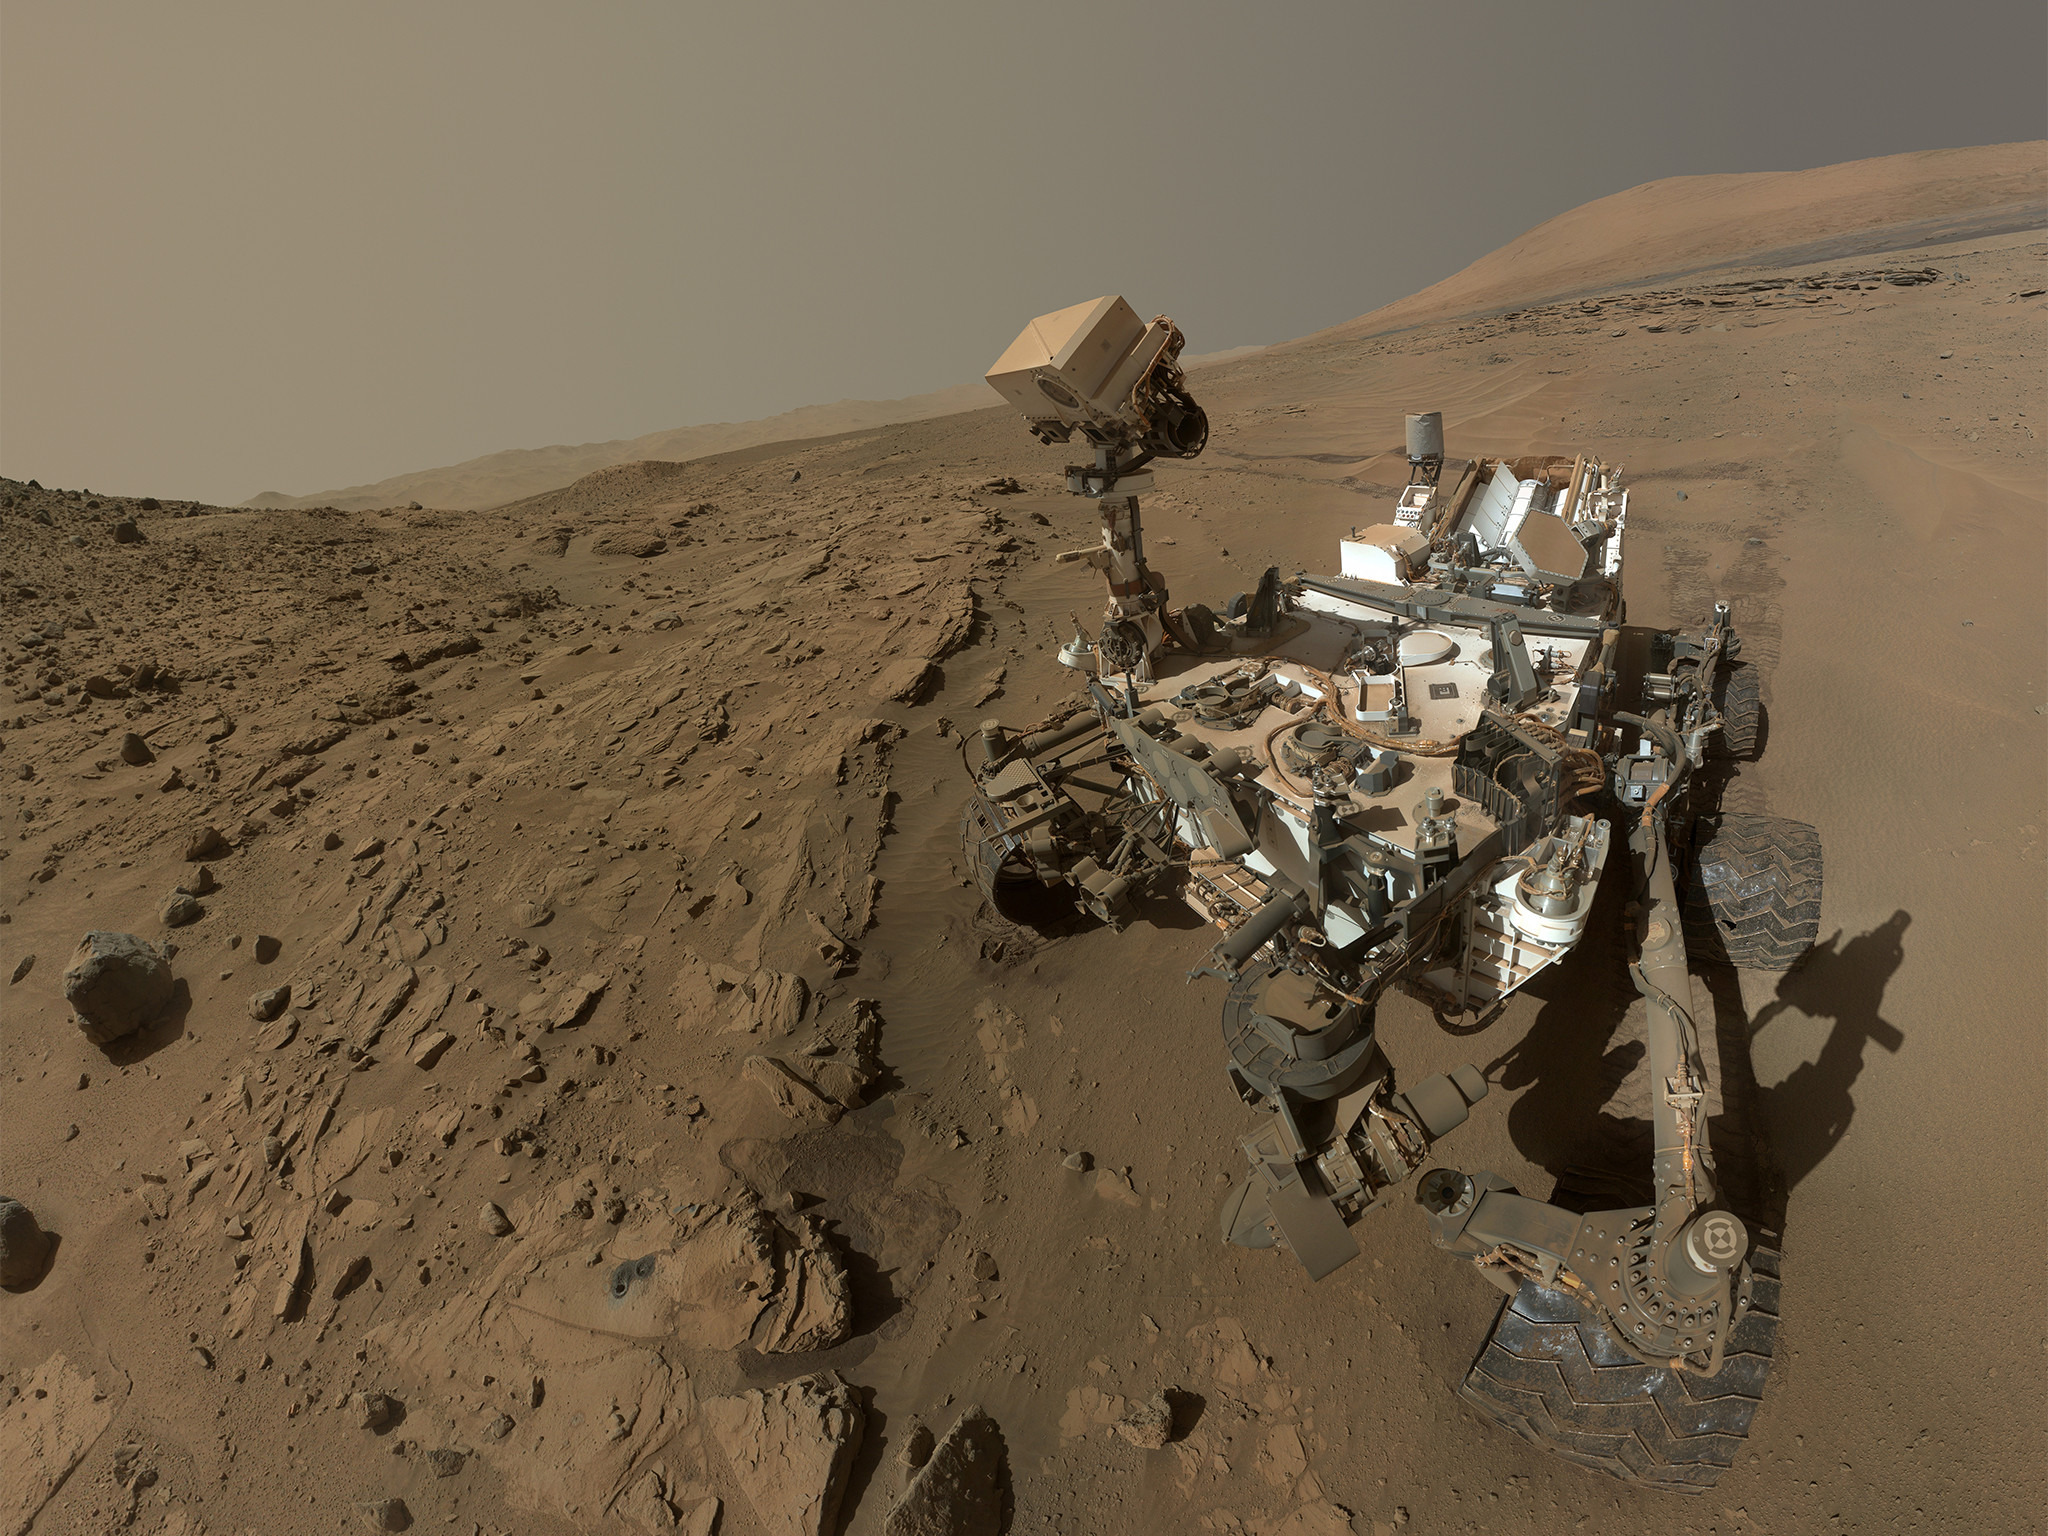 2048x1536 Alien Life on Mars? NASA Rover Spots Methane, a Possible Sign of Microbes